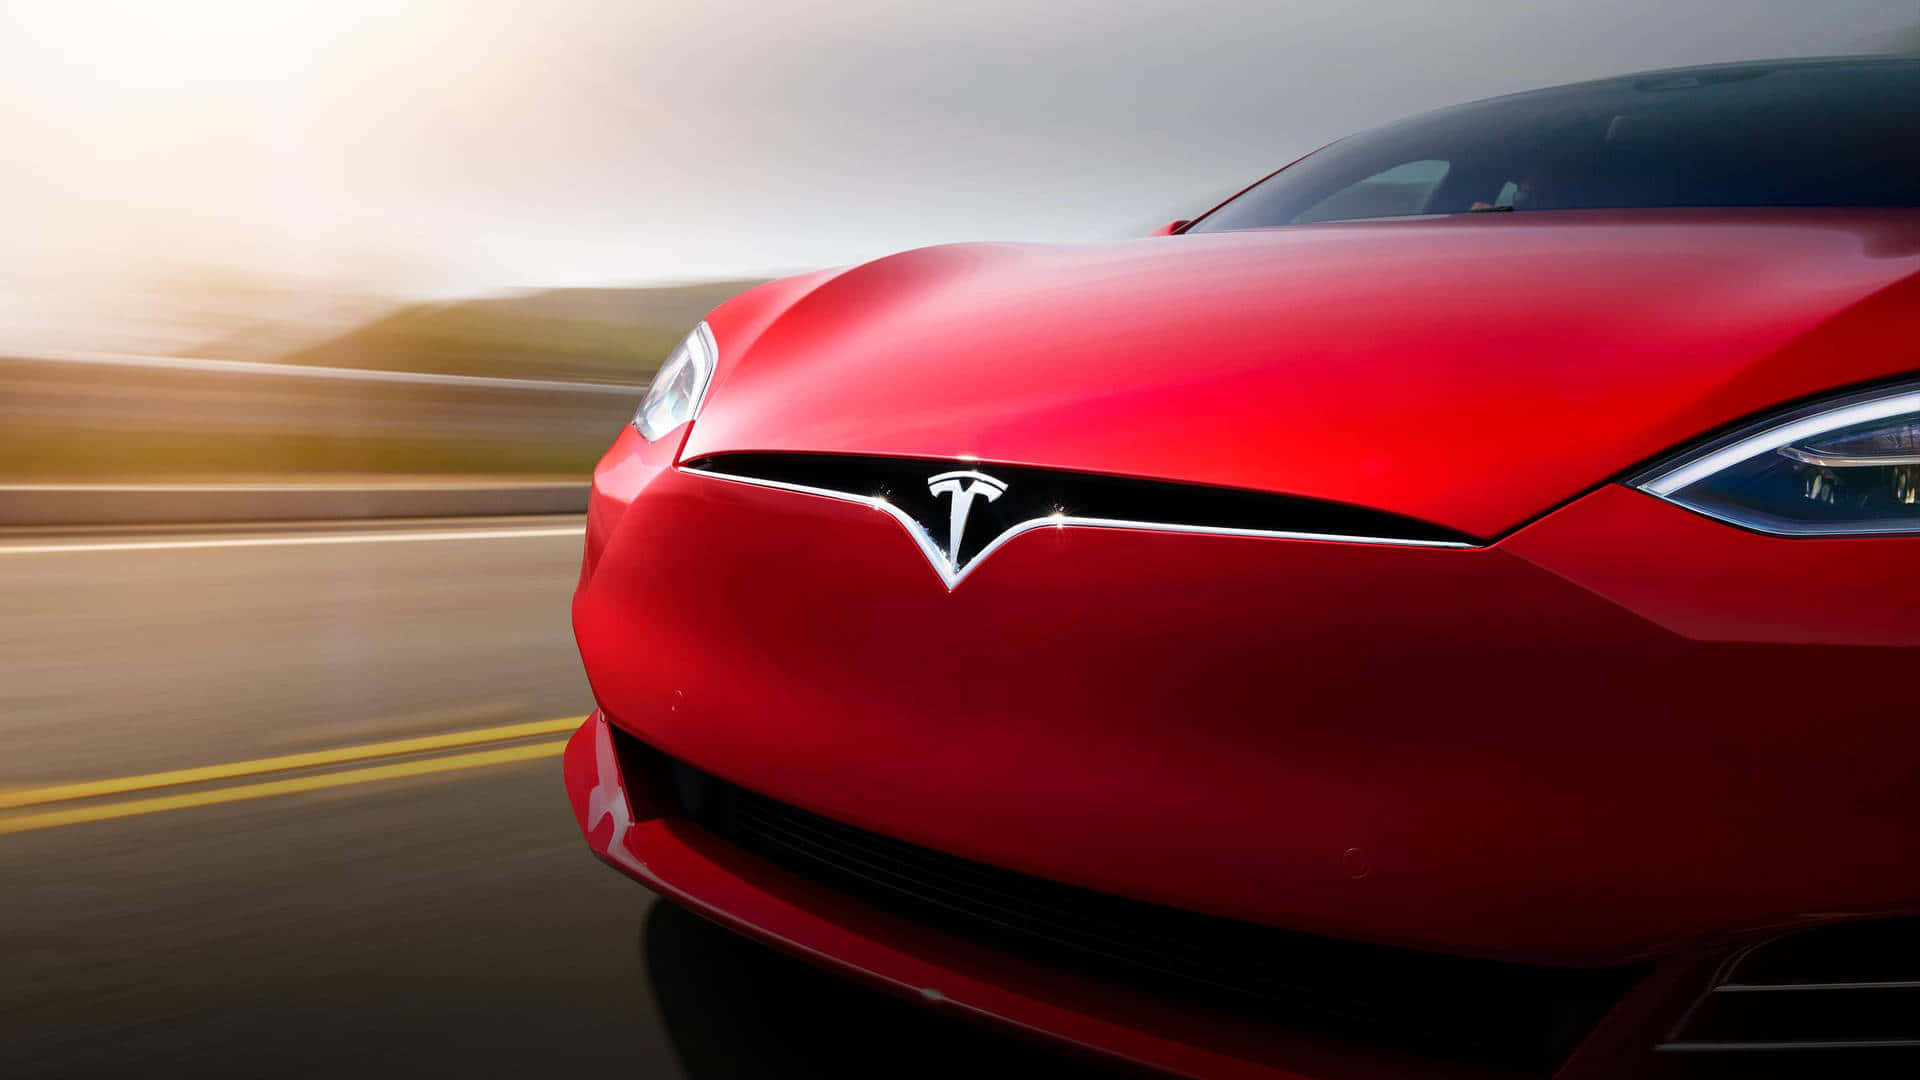 Tesla – Leading the Way in Innovation